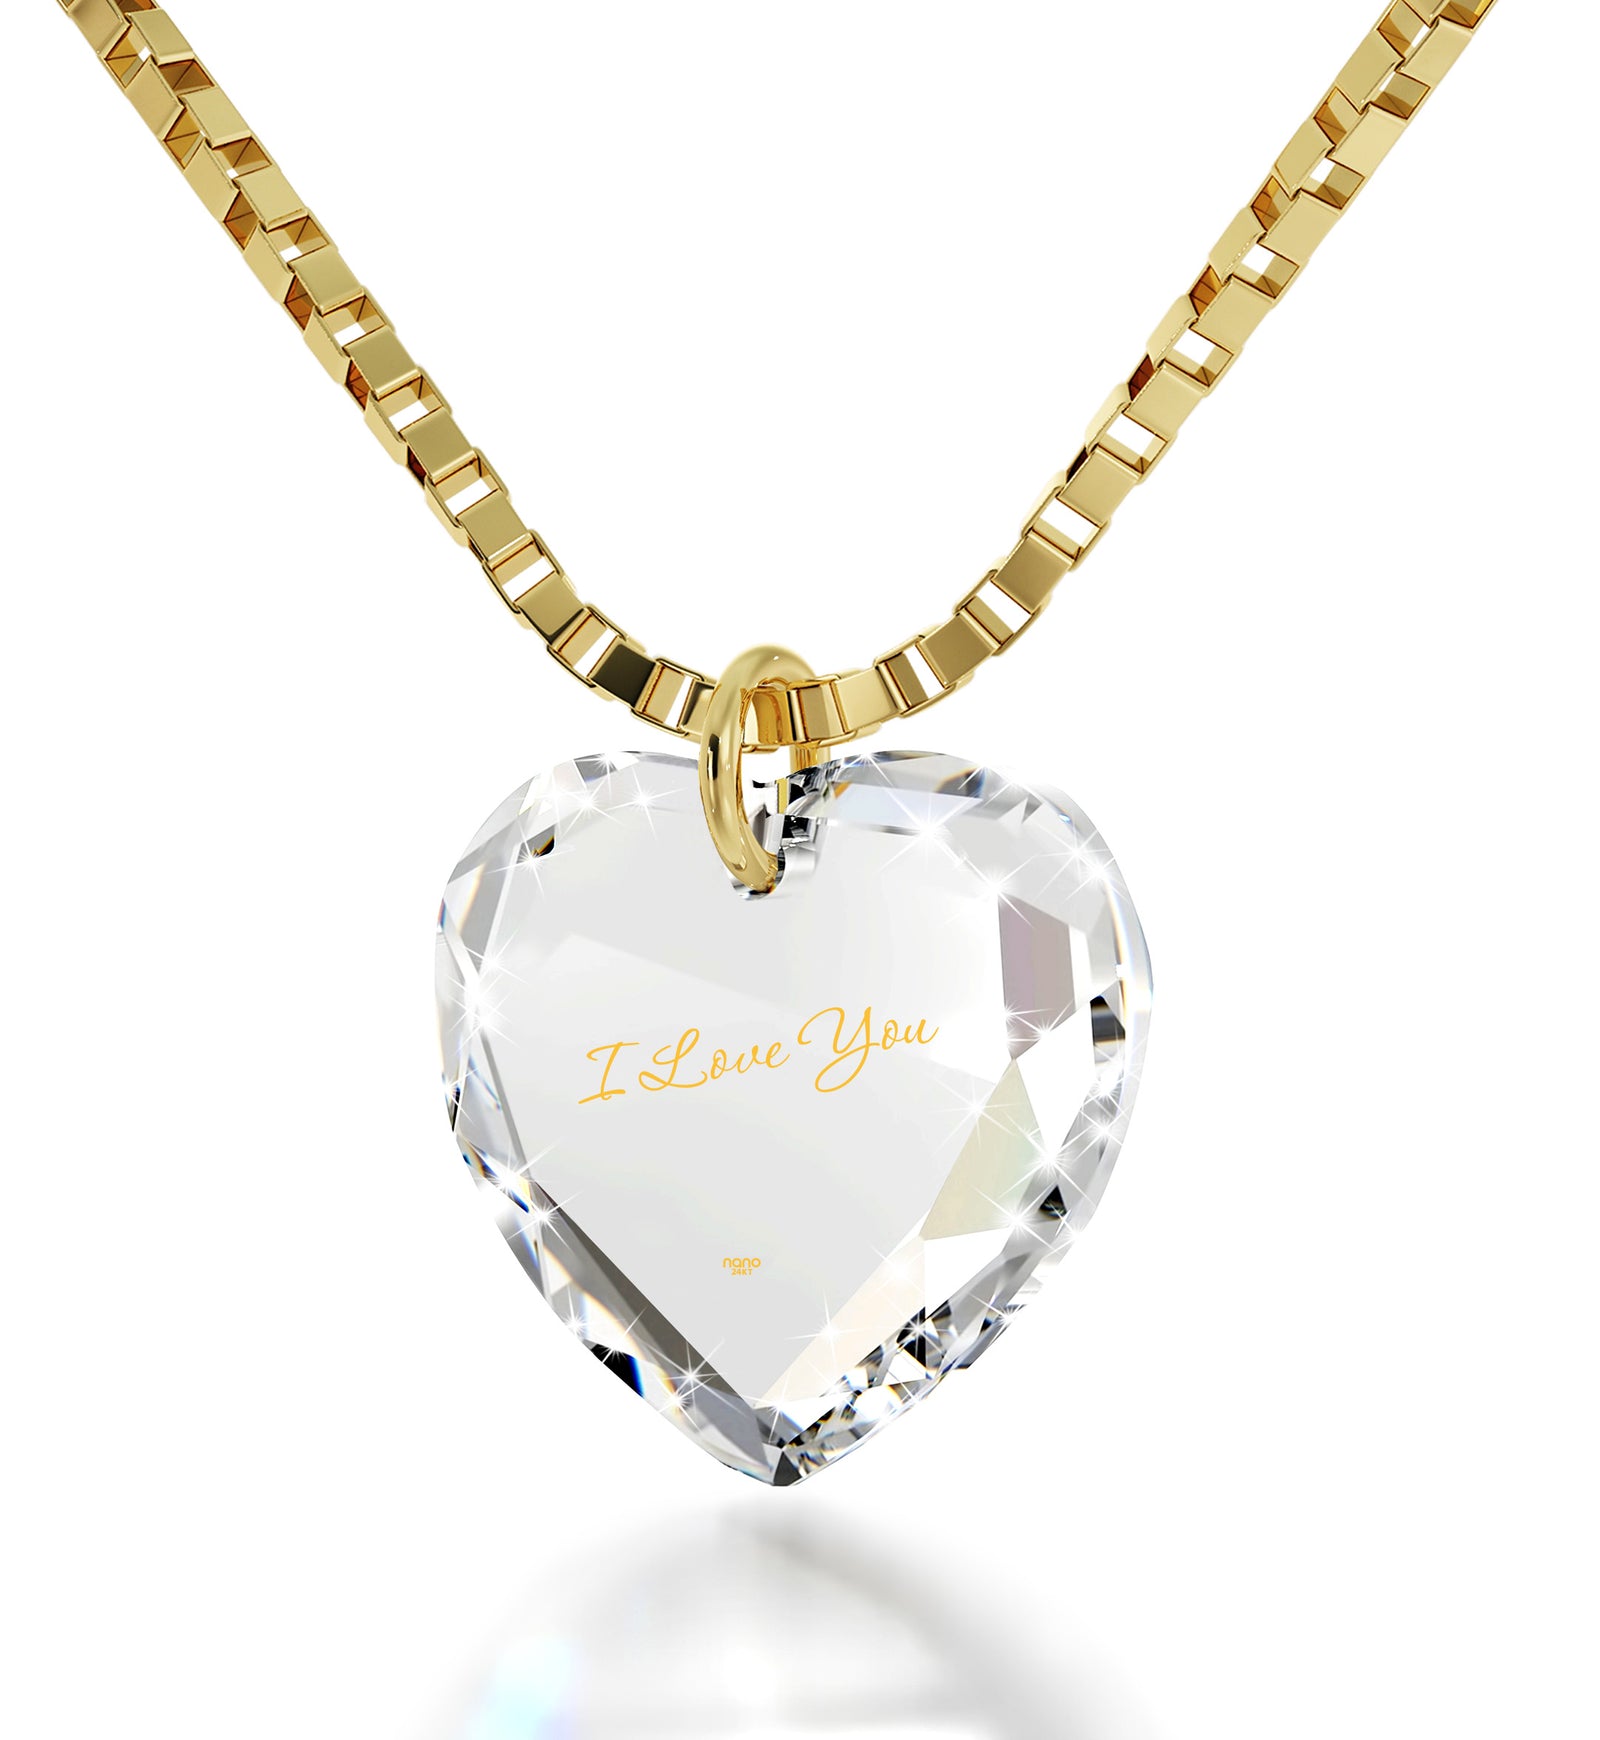 LIFETIME JEWELRY Filigree Heart Pendant with Twisted Nugget Chain Necklace  24k Gold Plated | Amazon.com